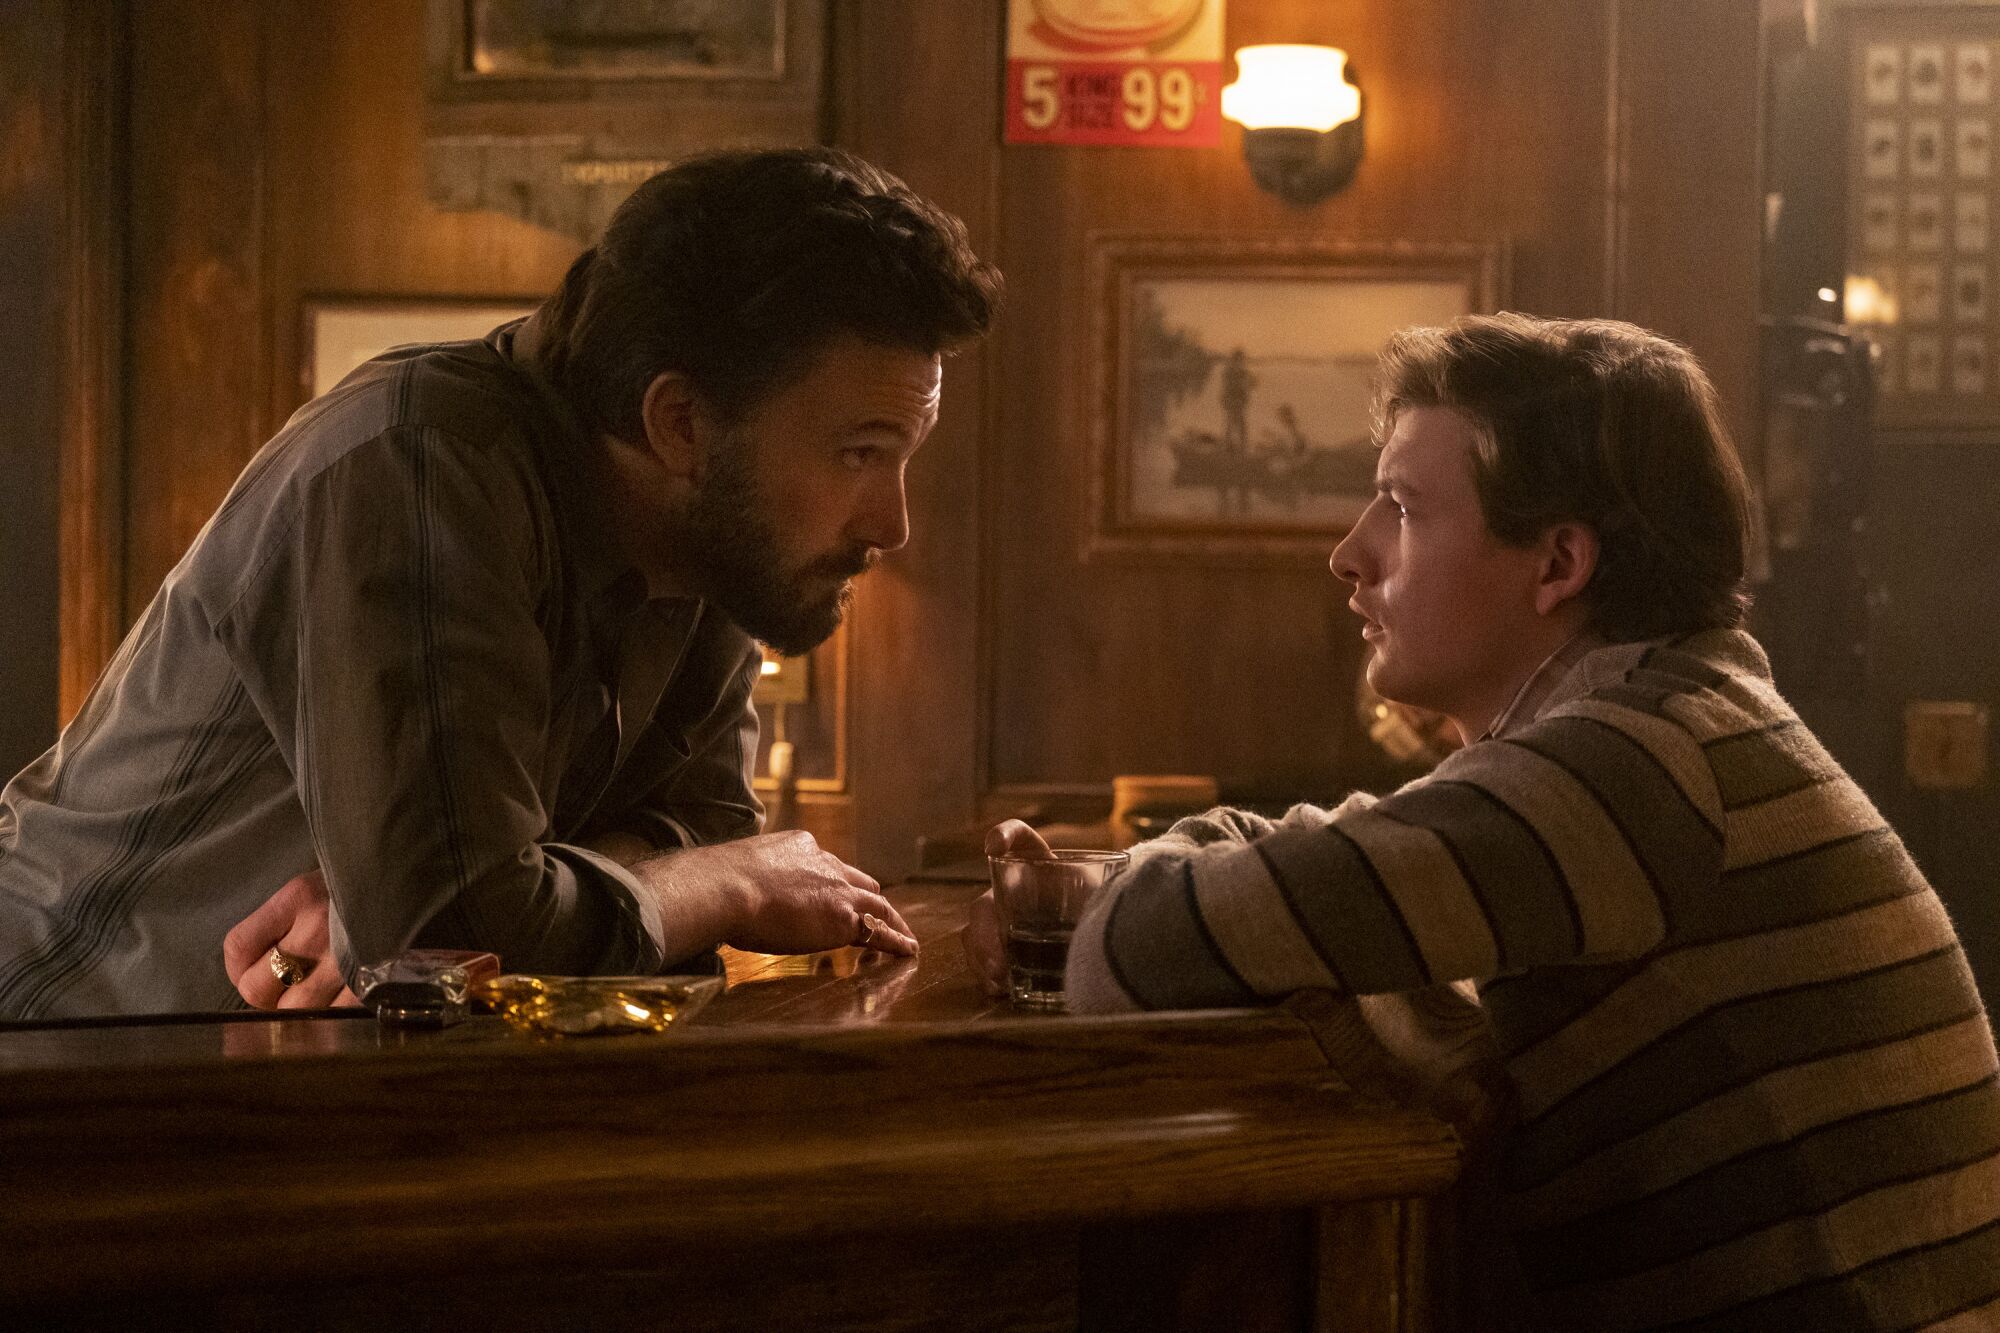 A bearded man talks with a younger man in the movie "The Tender Bar."